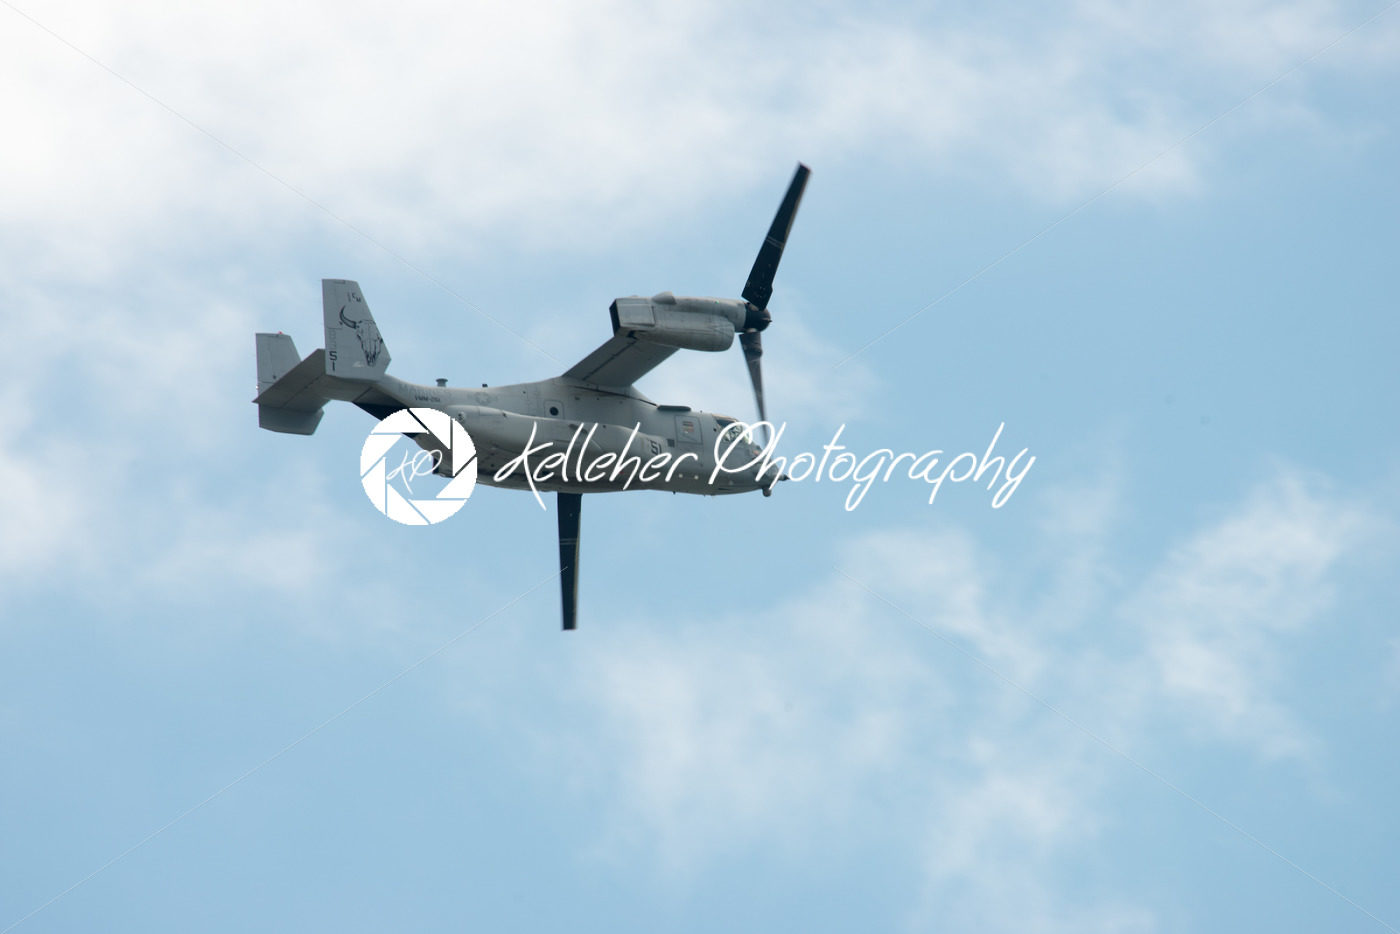 ATLANTIC CITY, NJ – AUGUST 17: Marines V-22 Osprey performing at the Annual Atlantic City Air Show on August 17, 2016 - Kelleher Photography Store